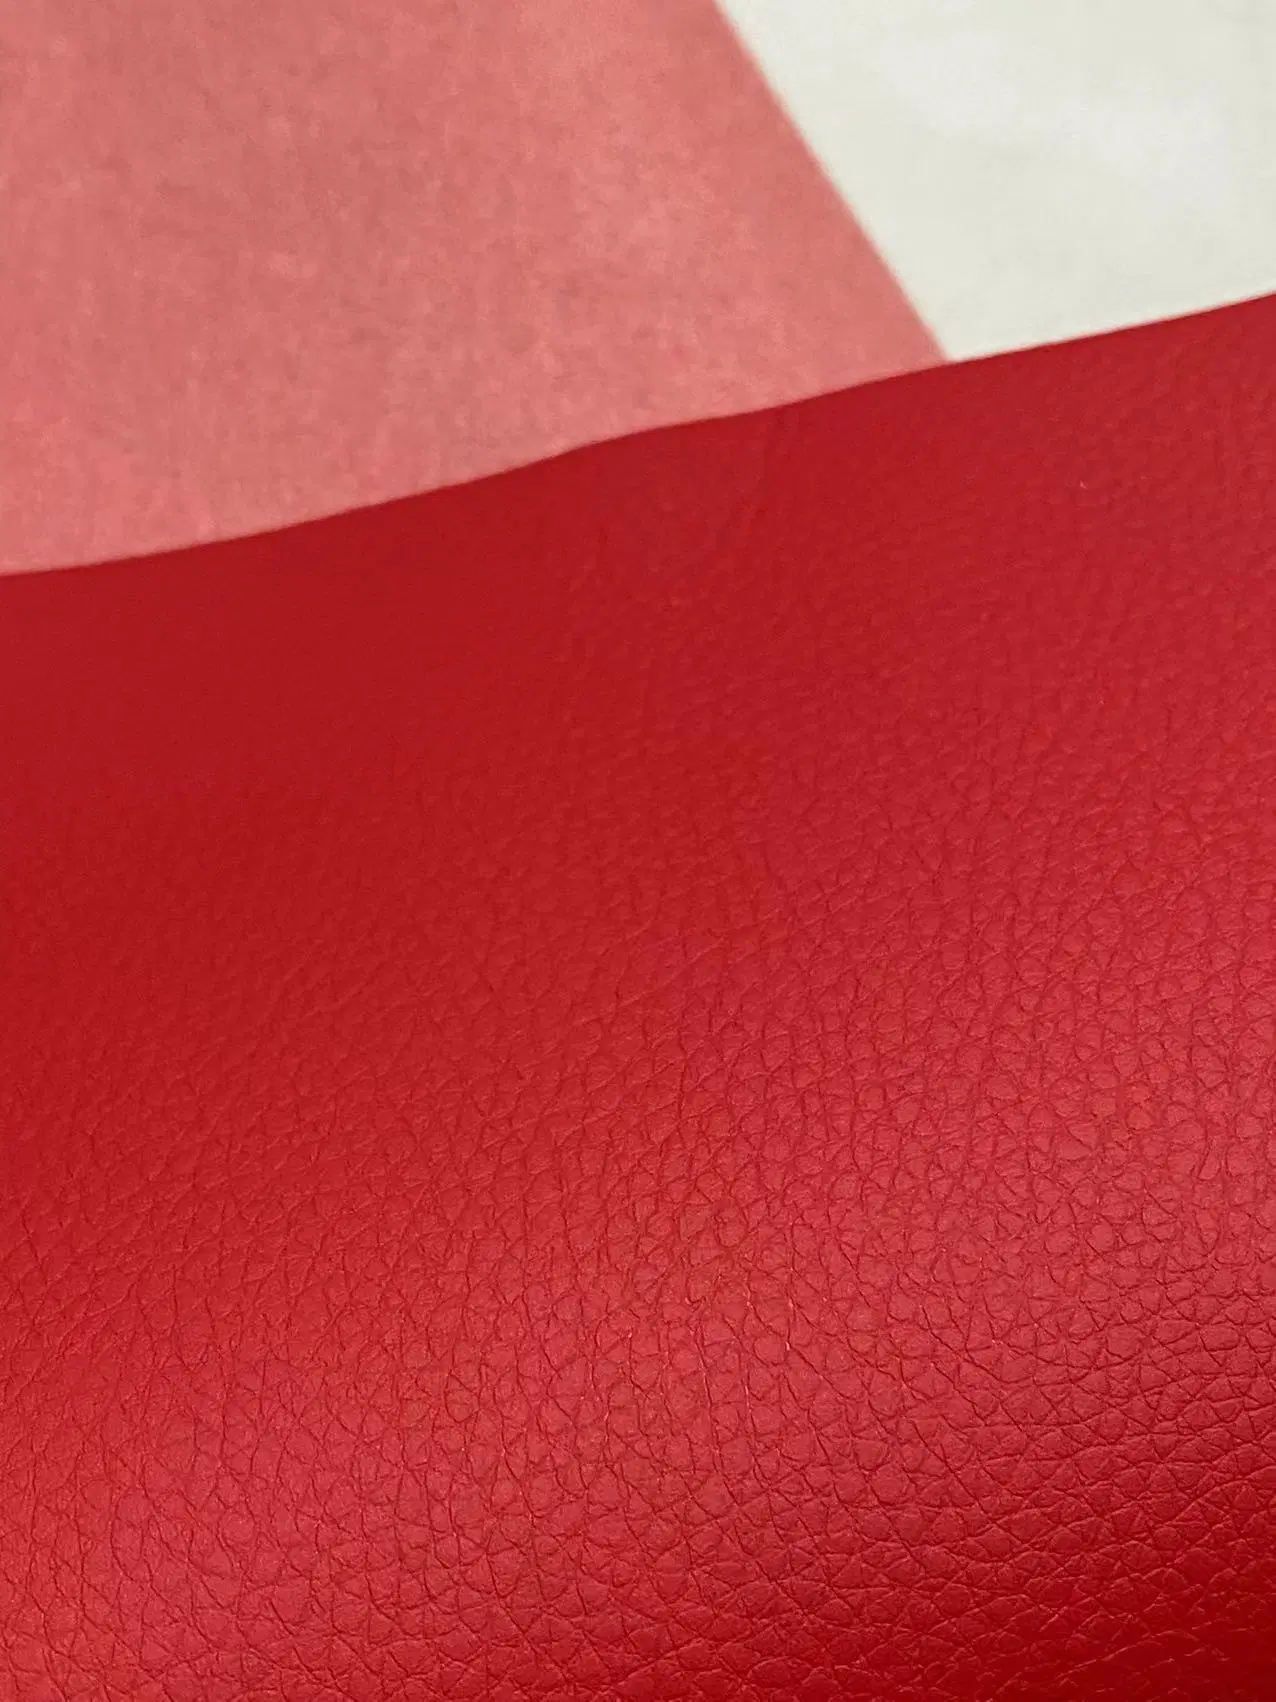 Upholstery Fabric Synthetic Leather Microfibre Leather Huafon High Quality Goods Reinforcement Nonwoven